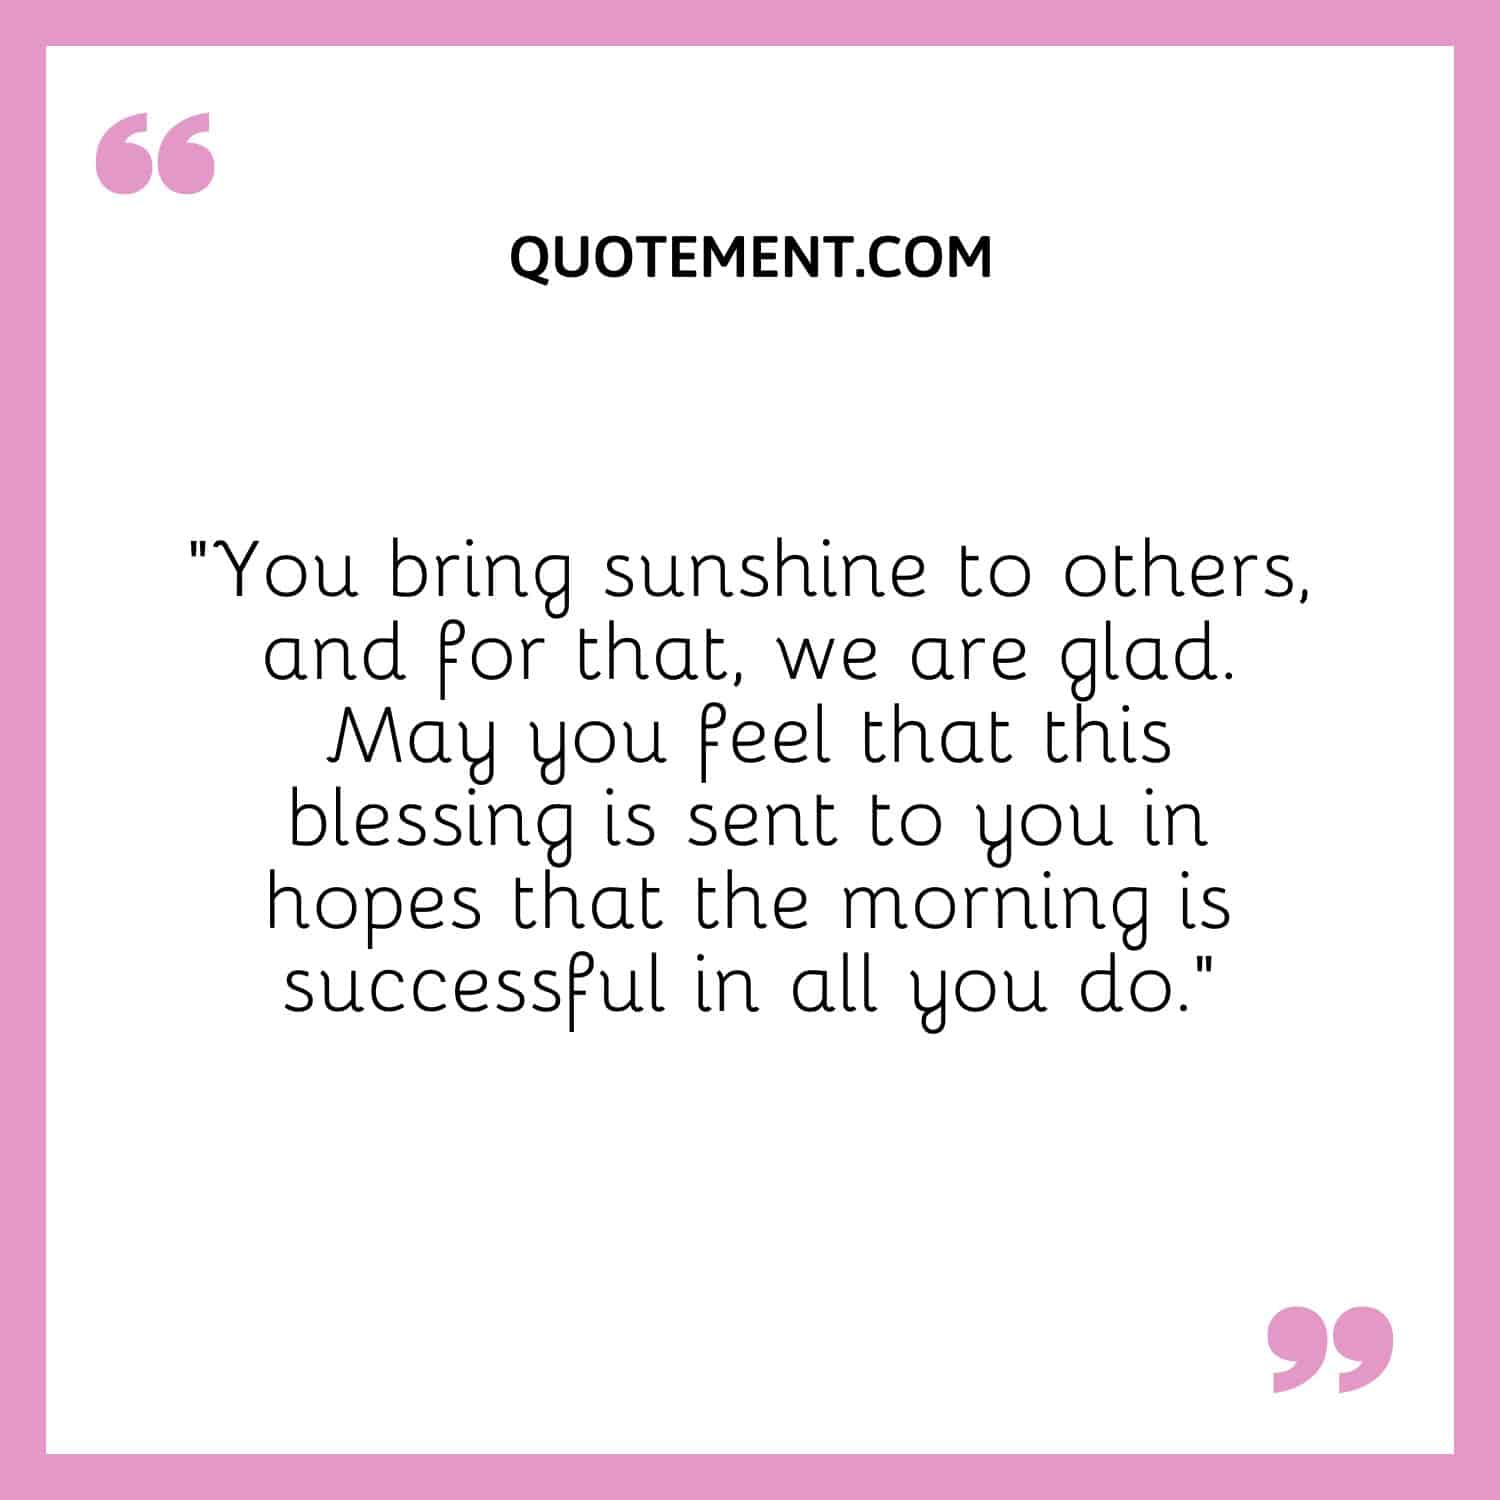 You bring sunshine to others, and for that, we are glad